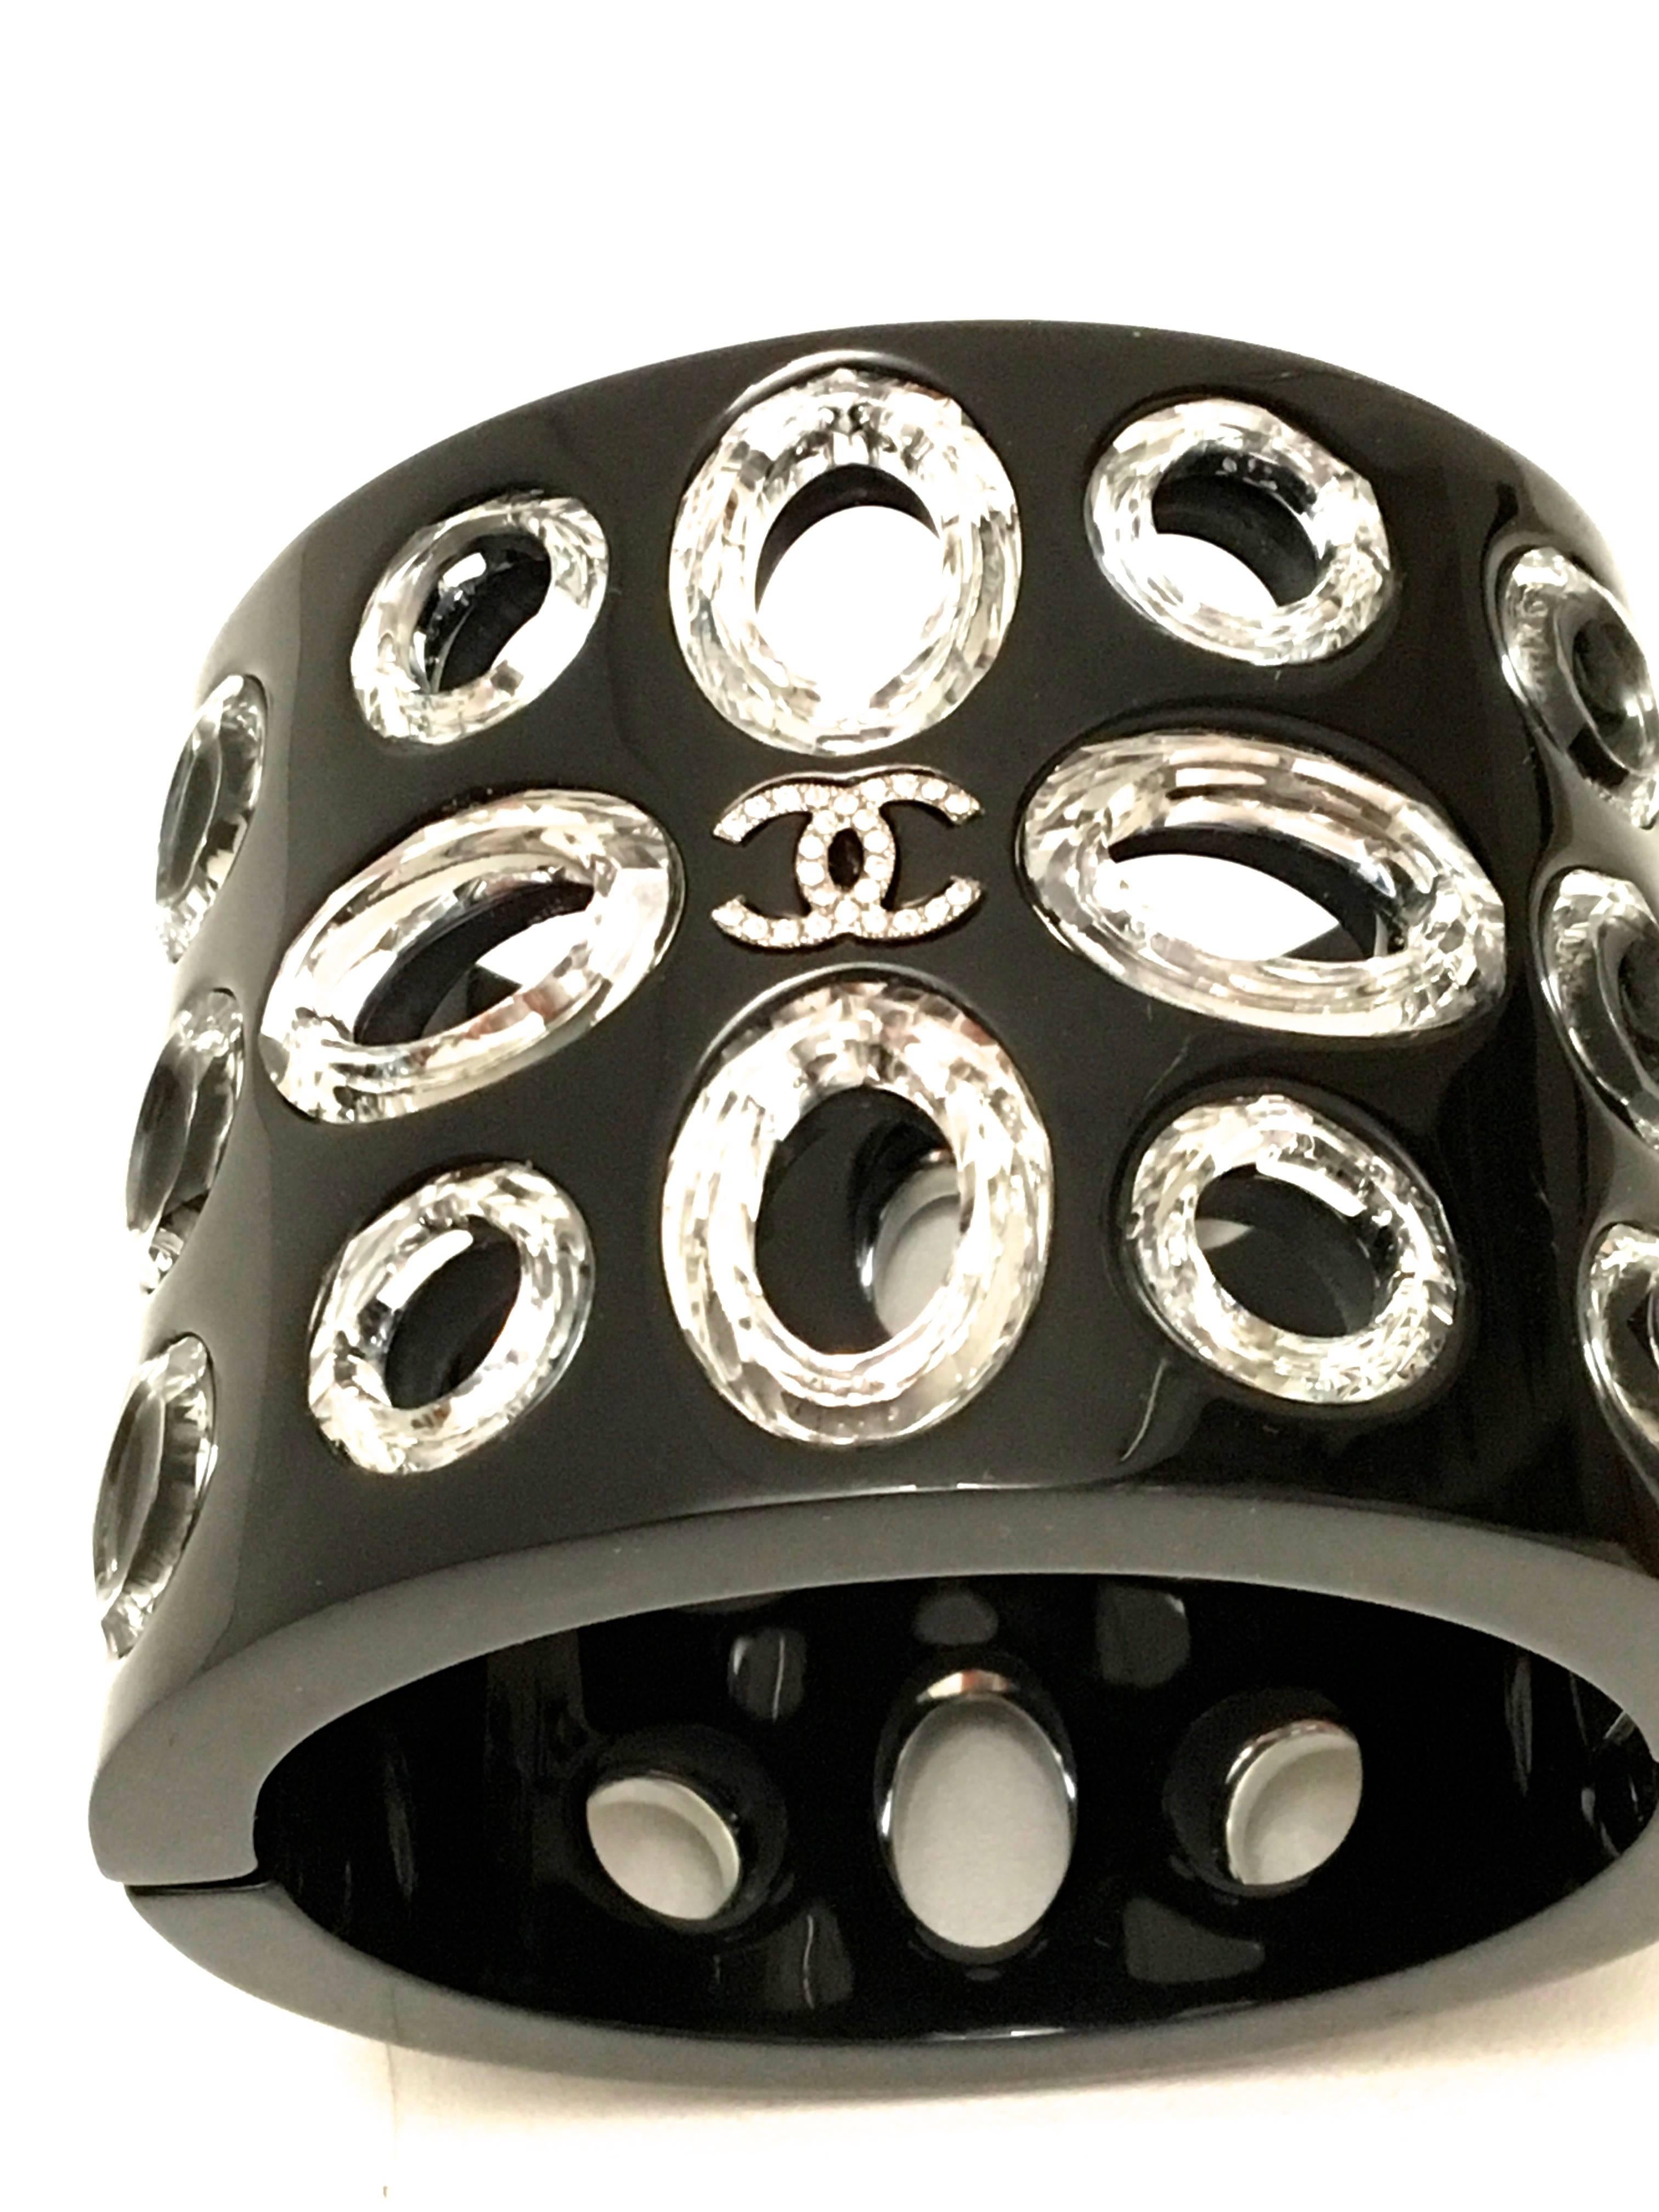 Chanel Cuff Bracelet - Lucite and Swarovski Crystals For Sale 2